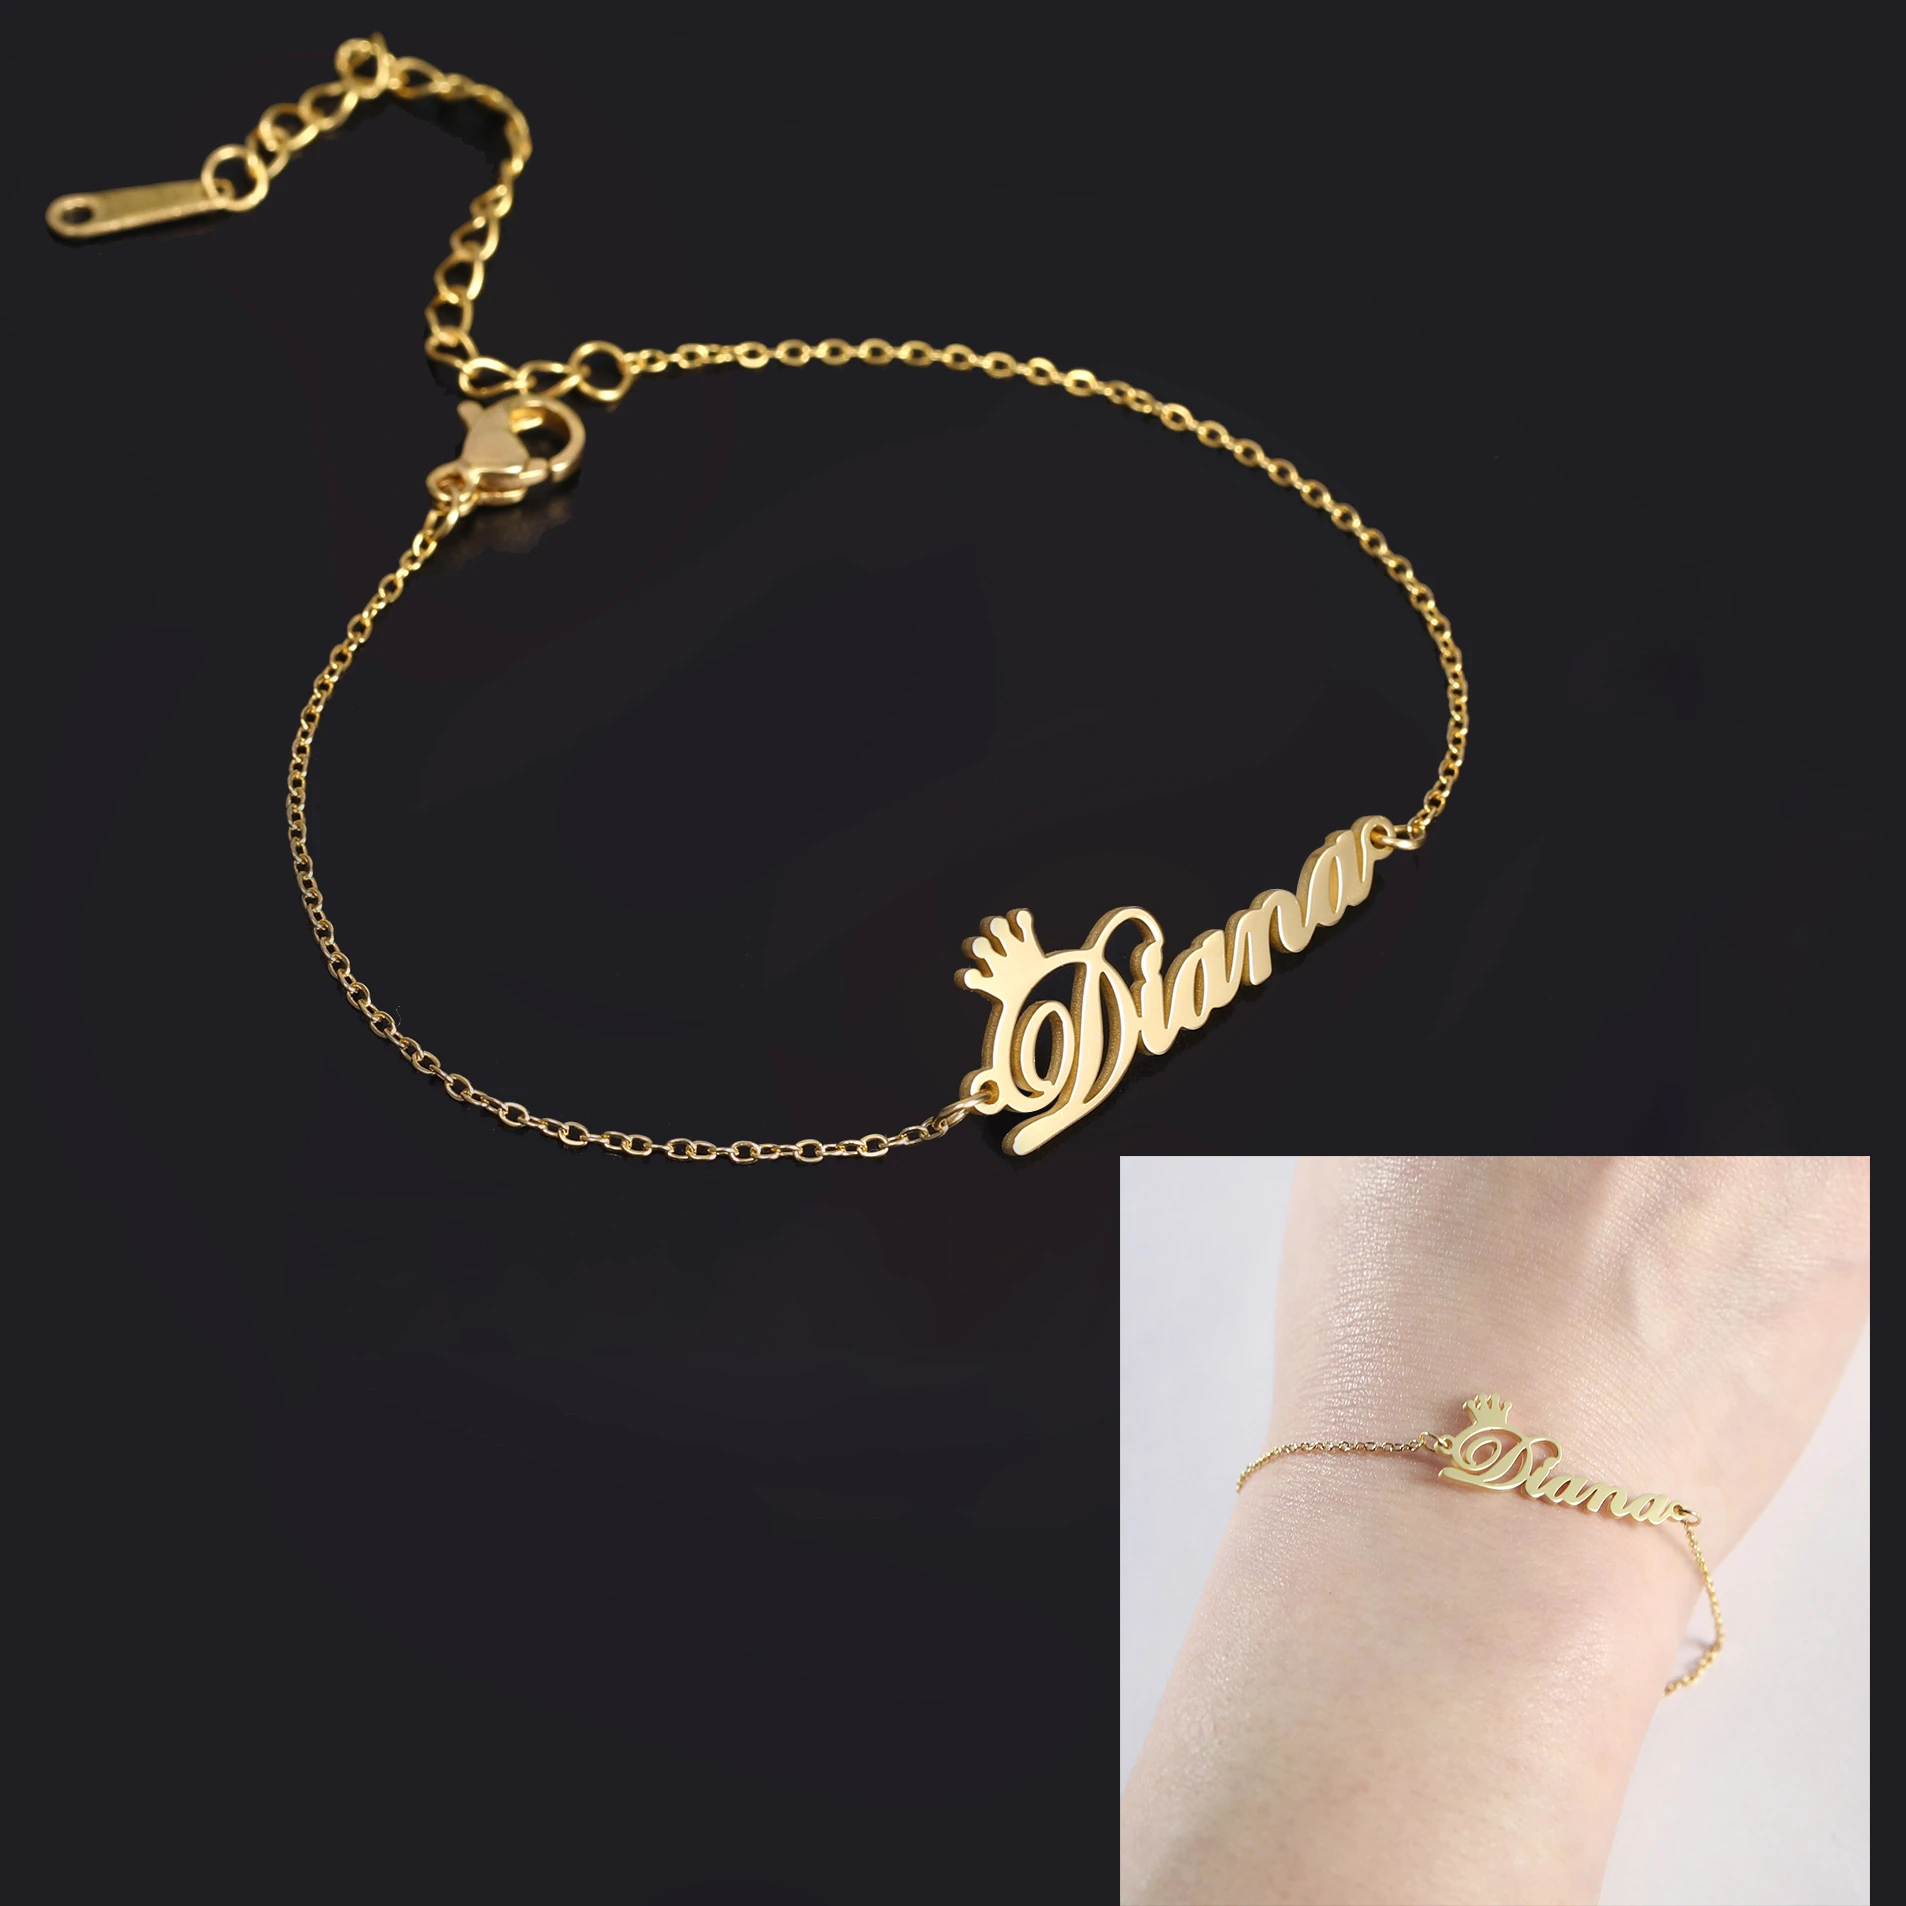 Sipuris Custom Name Bracelets With Crown For Women Girl Stainless Steel Customized Personalized Unique Bracelet Jewelry Children